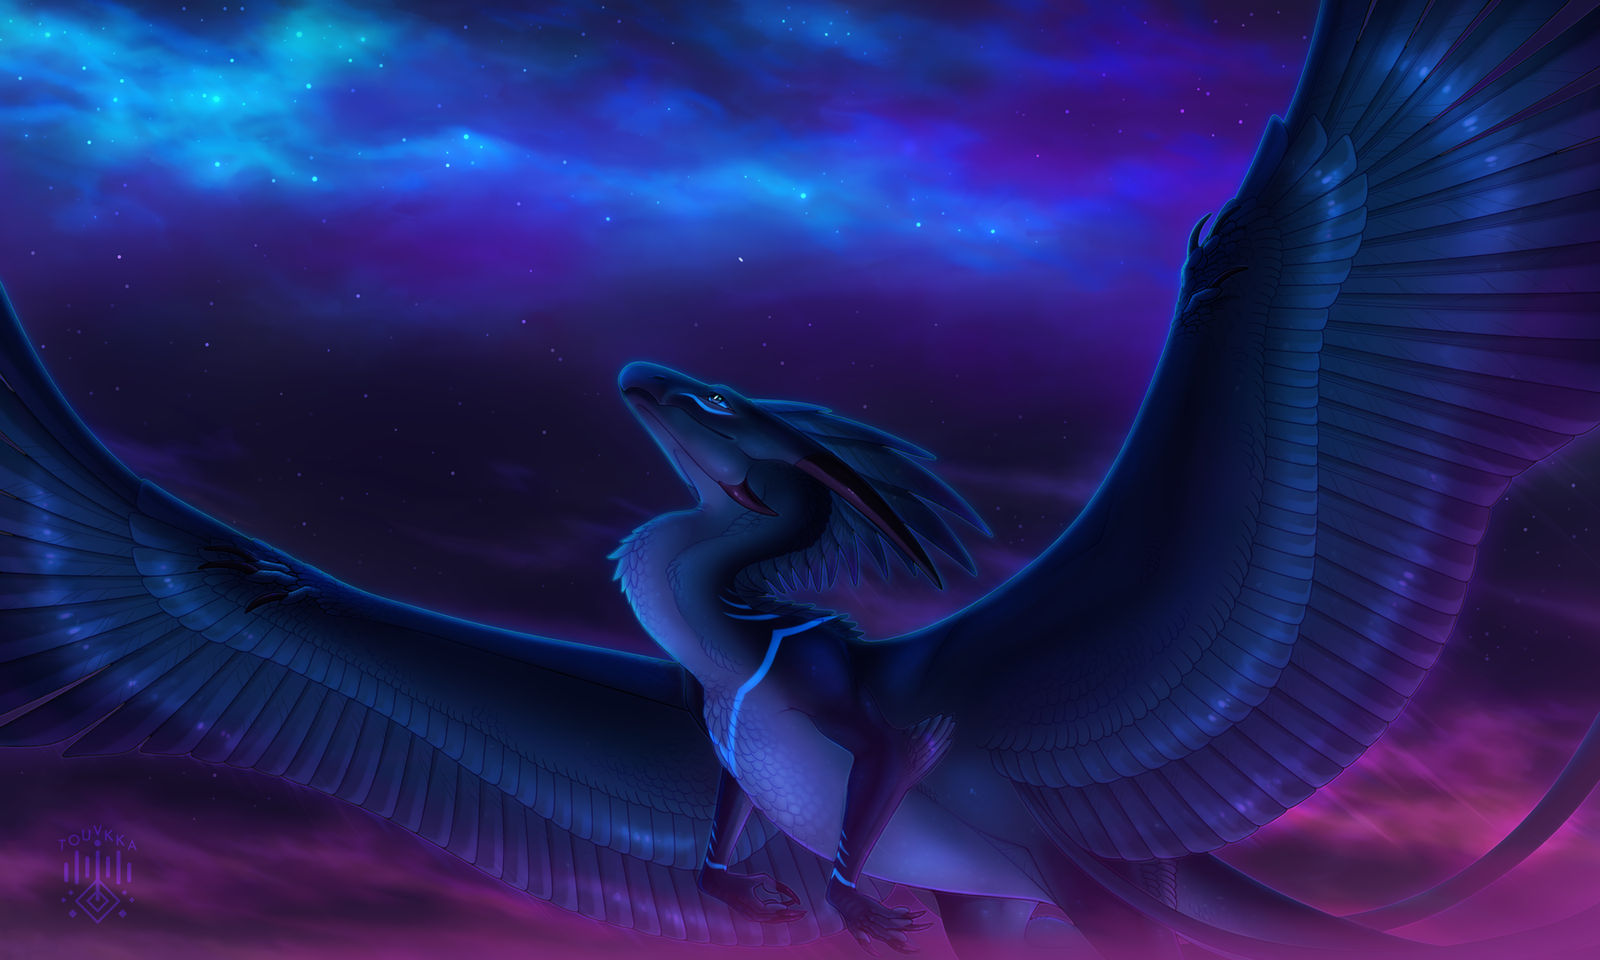 stardust_by_touvkka_detb6hh-fullview.png